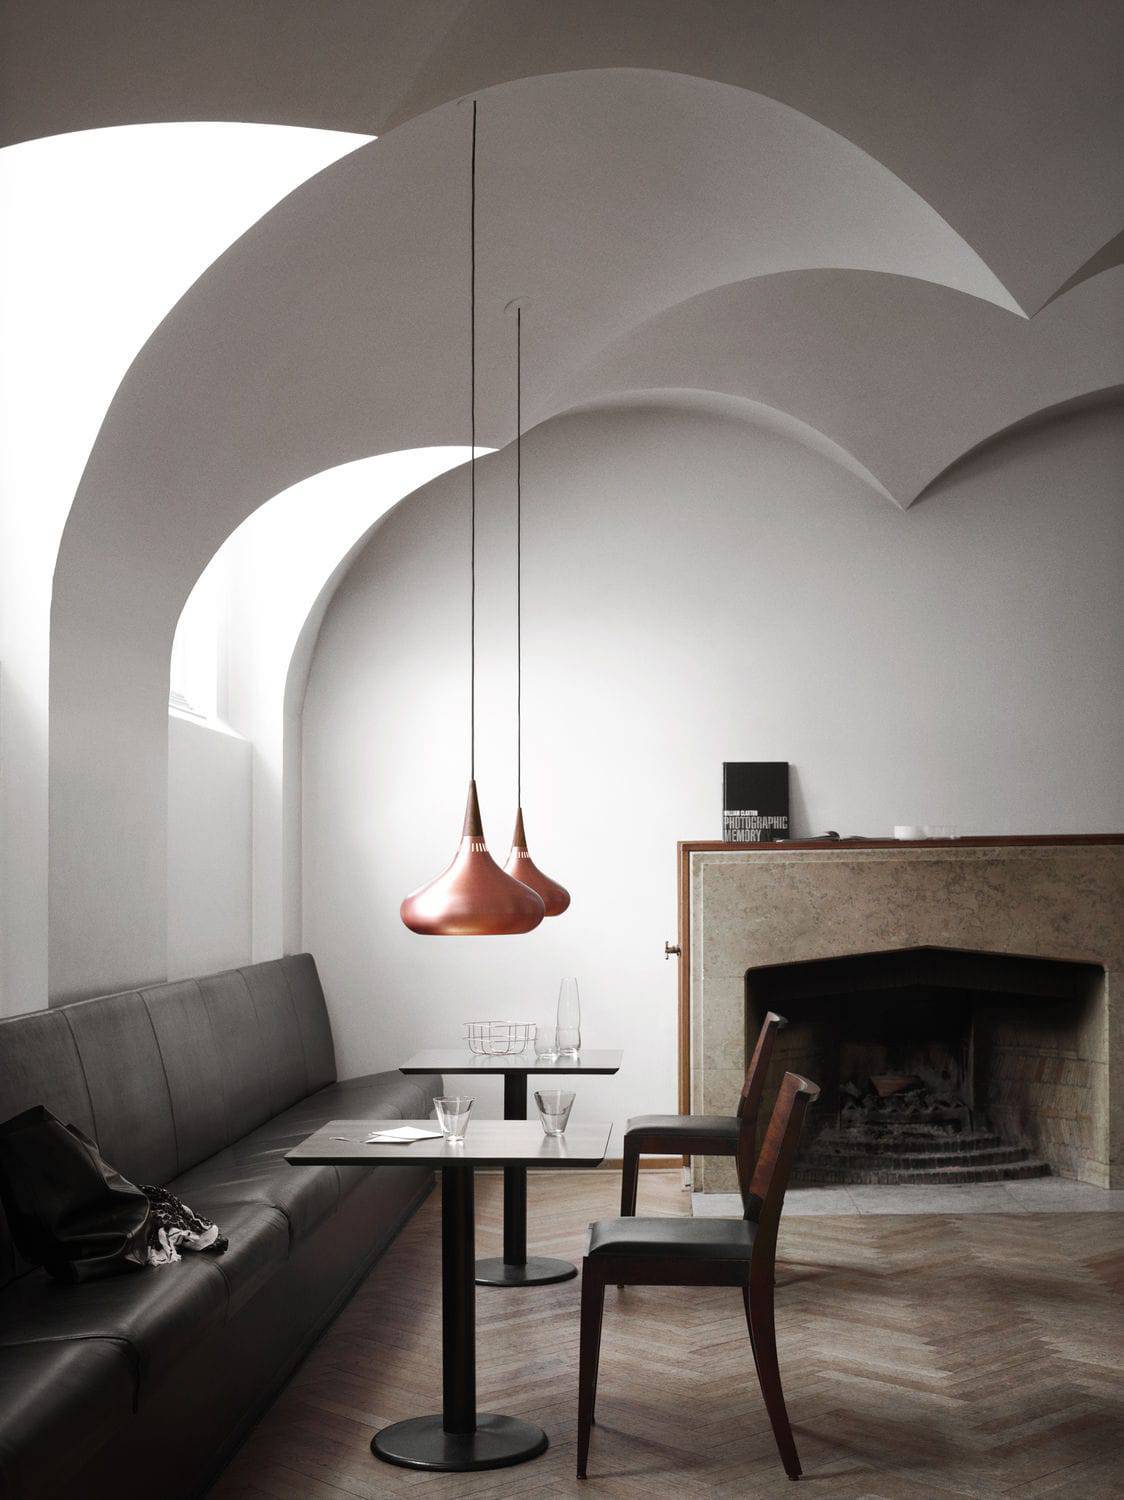 Use pendant lights to decorate